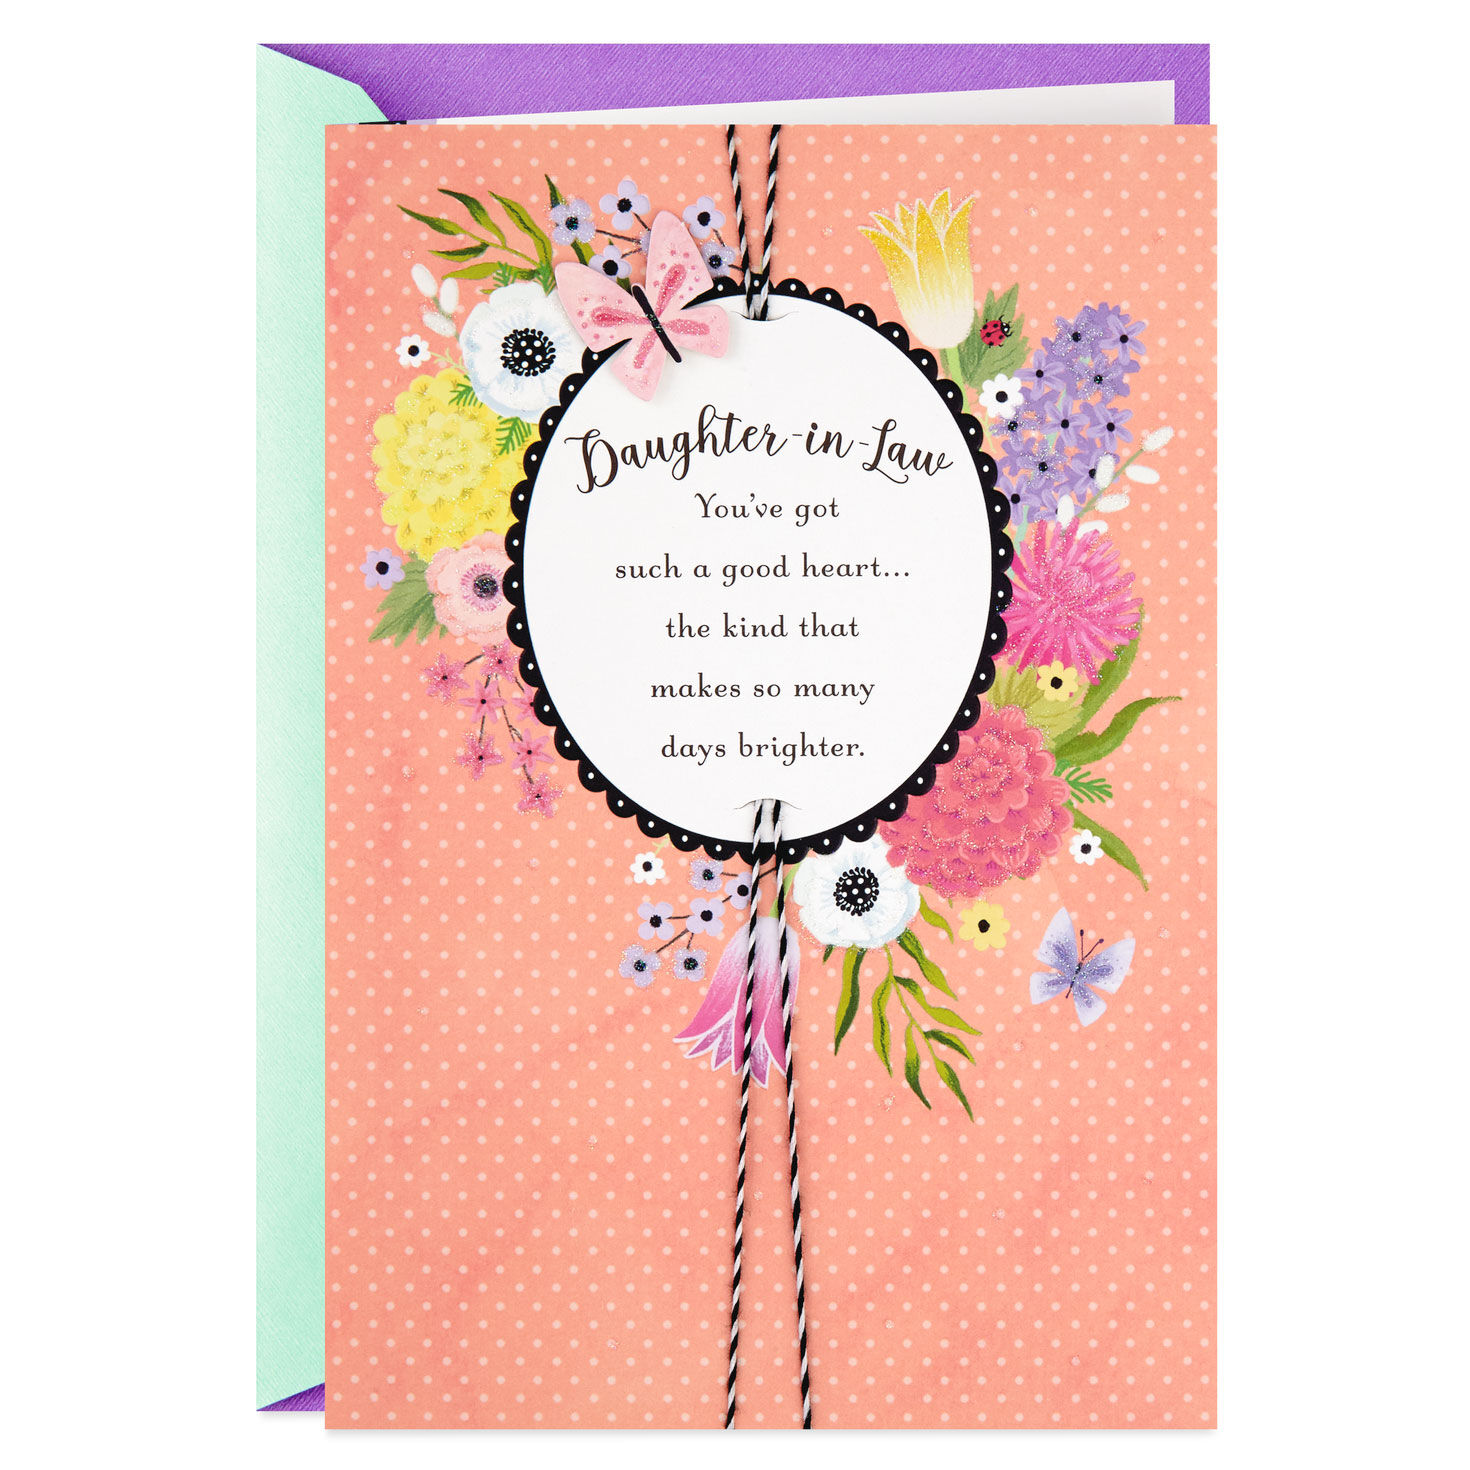 Lucky to Have You in Our Lives Hallmark Mothers Day Card for Daughter-in-Law